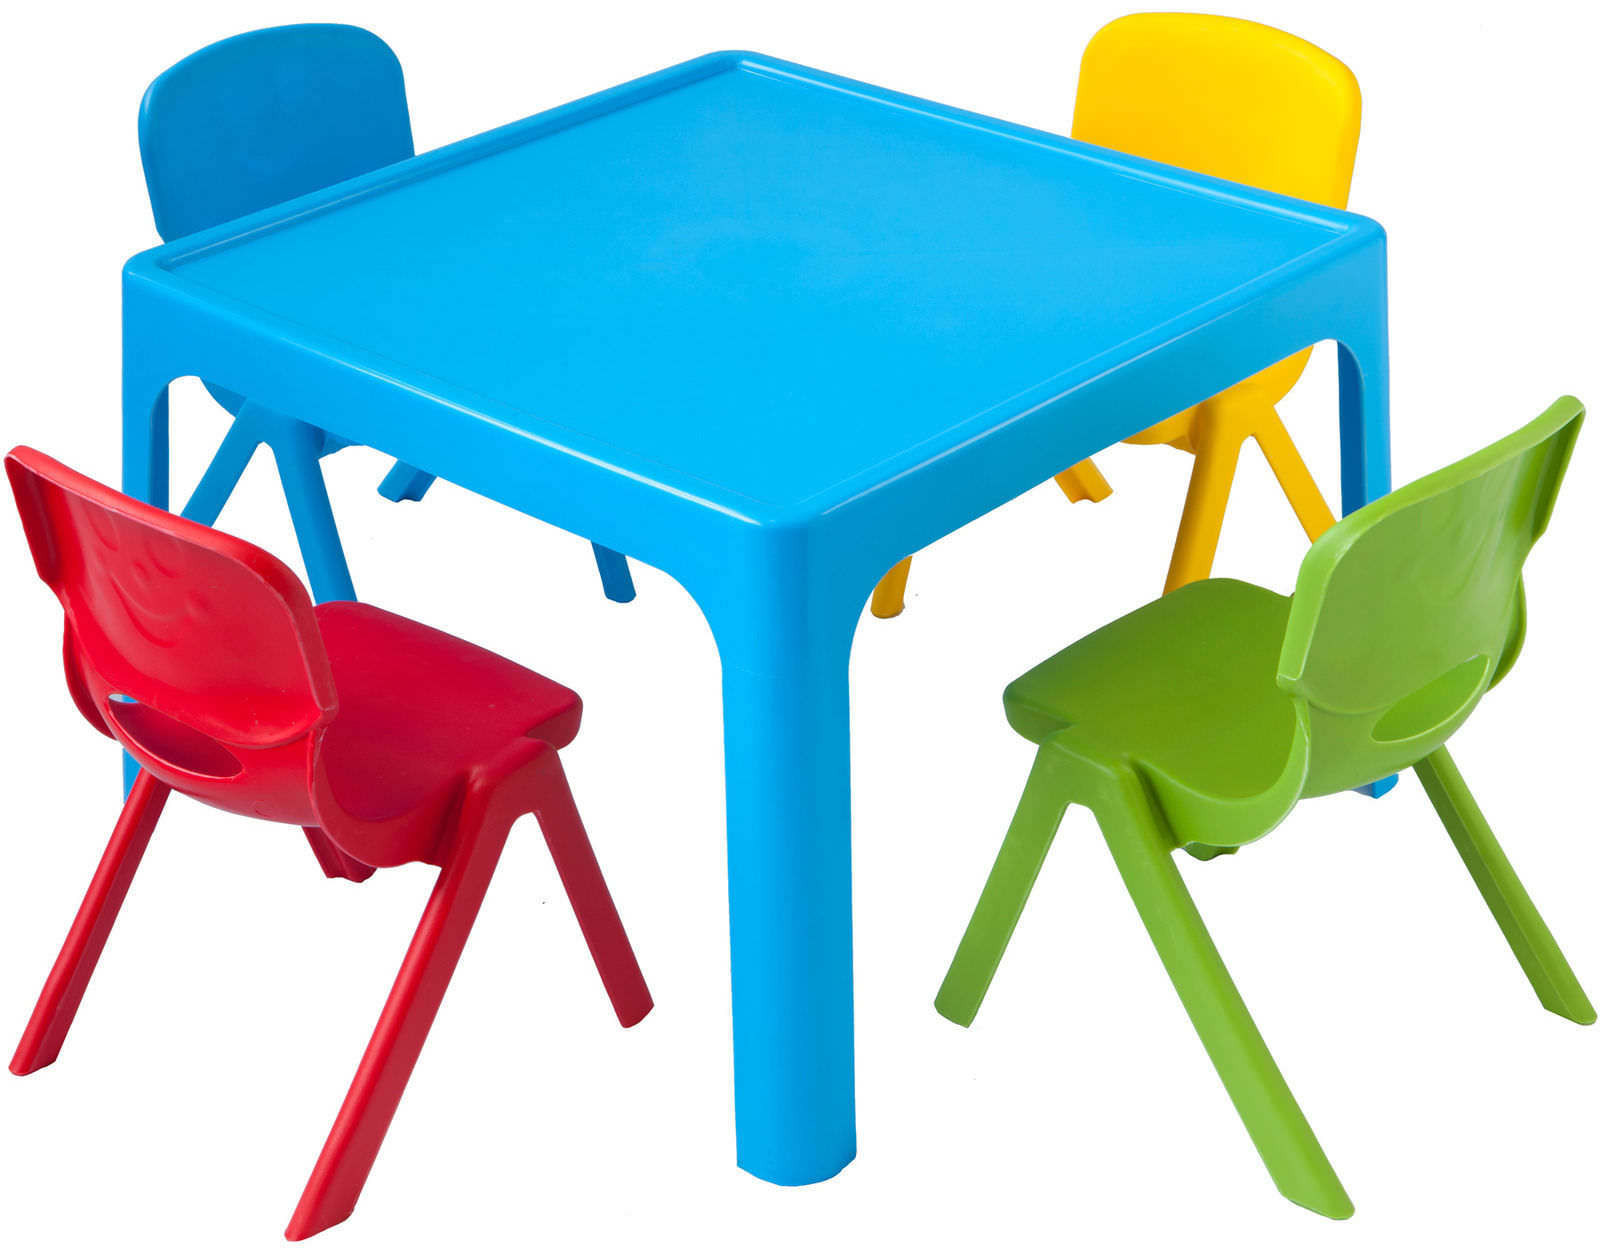 Children's Outdoor Table and Chairs